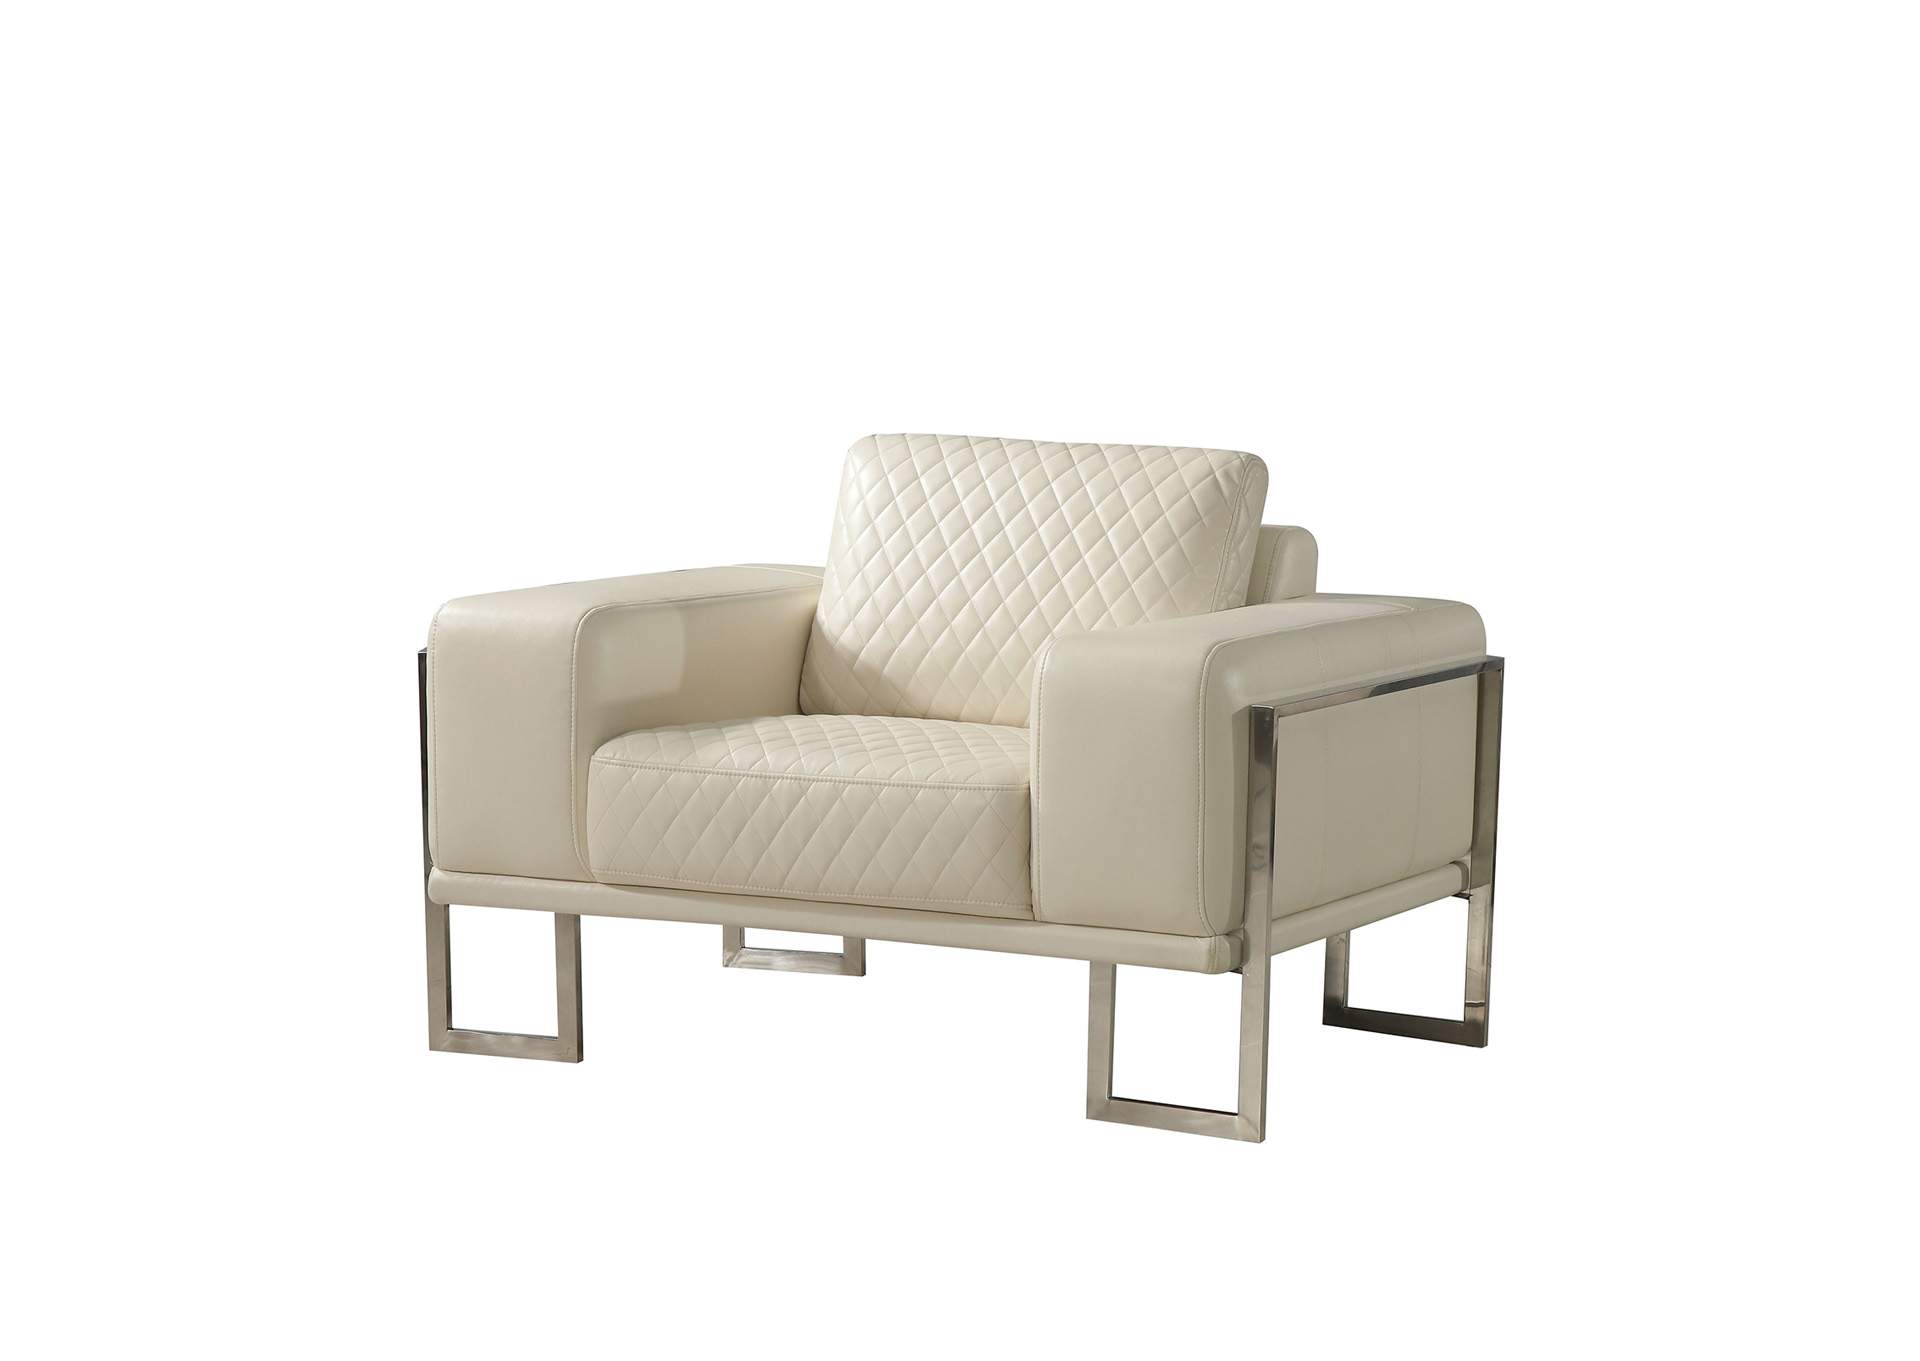 Quilted White Chair,Global Furniture USA